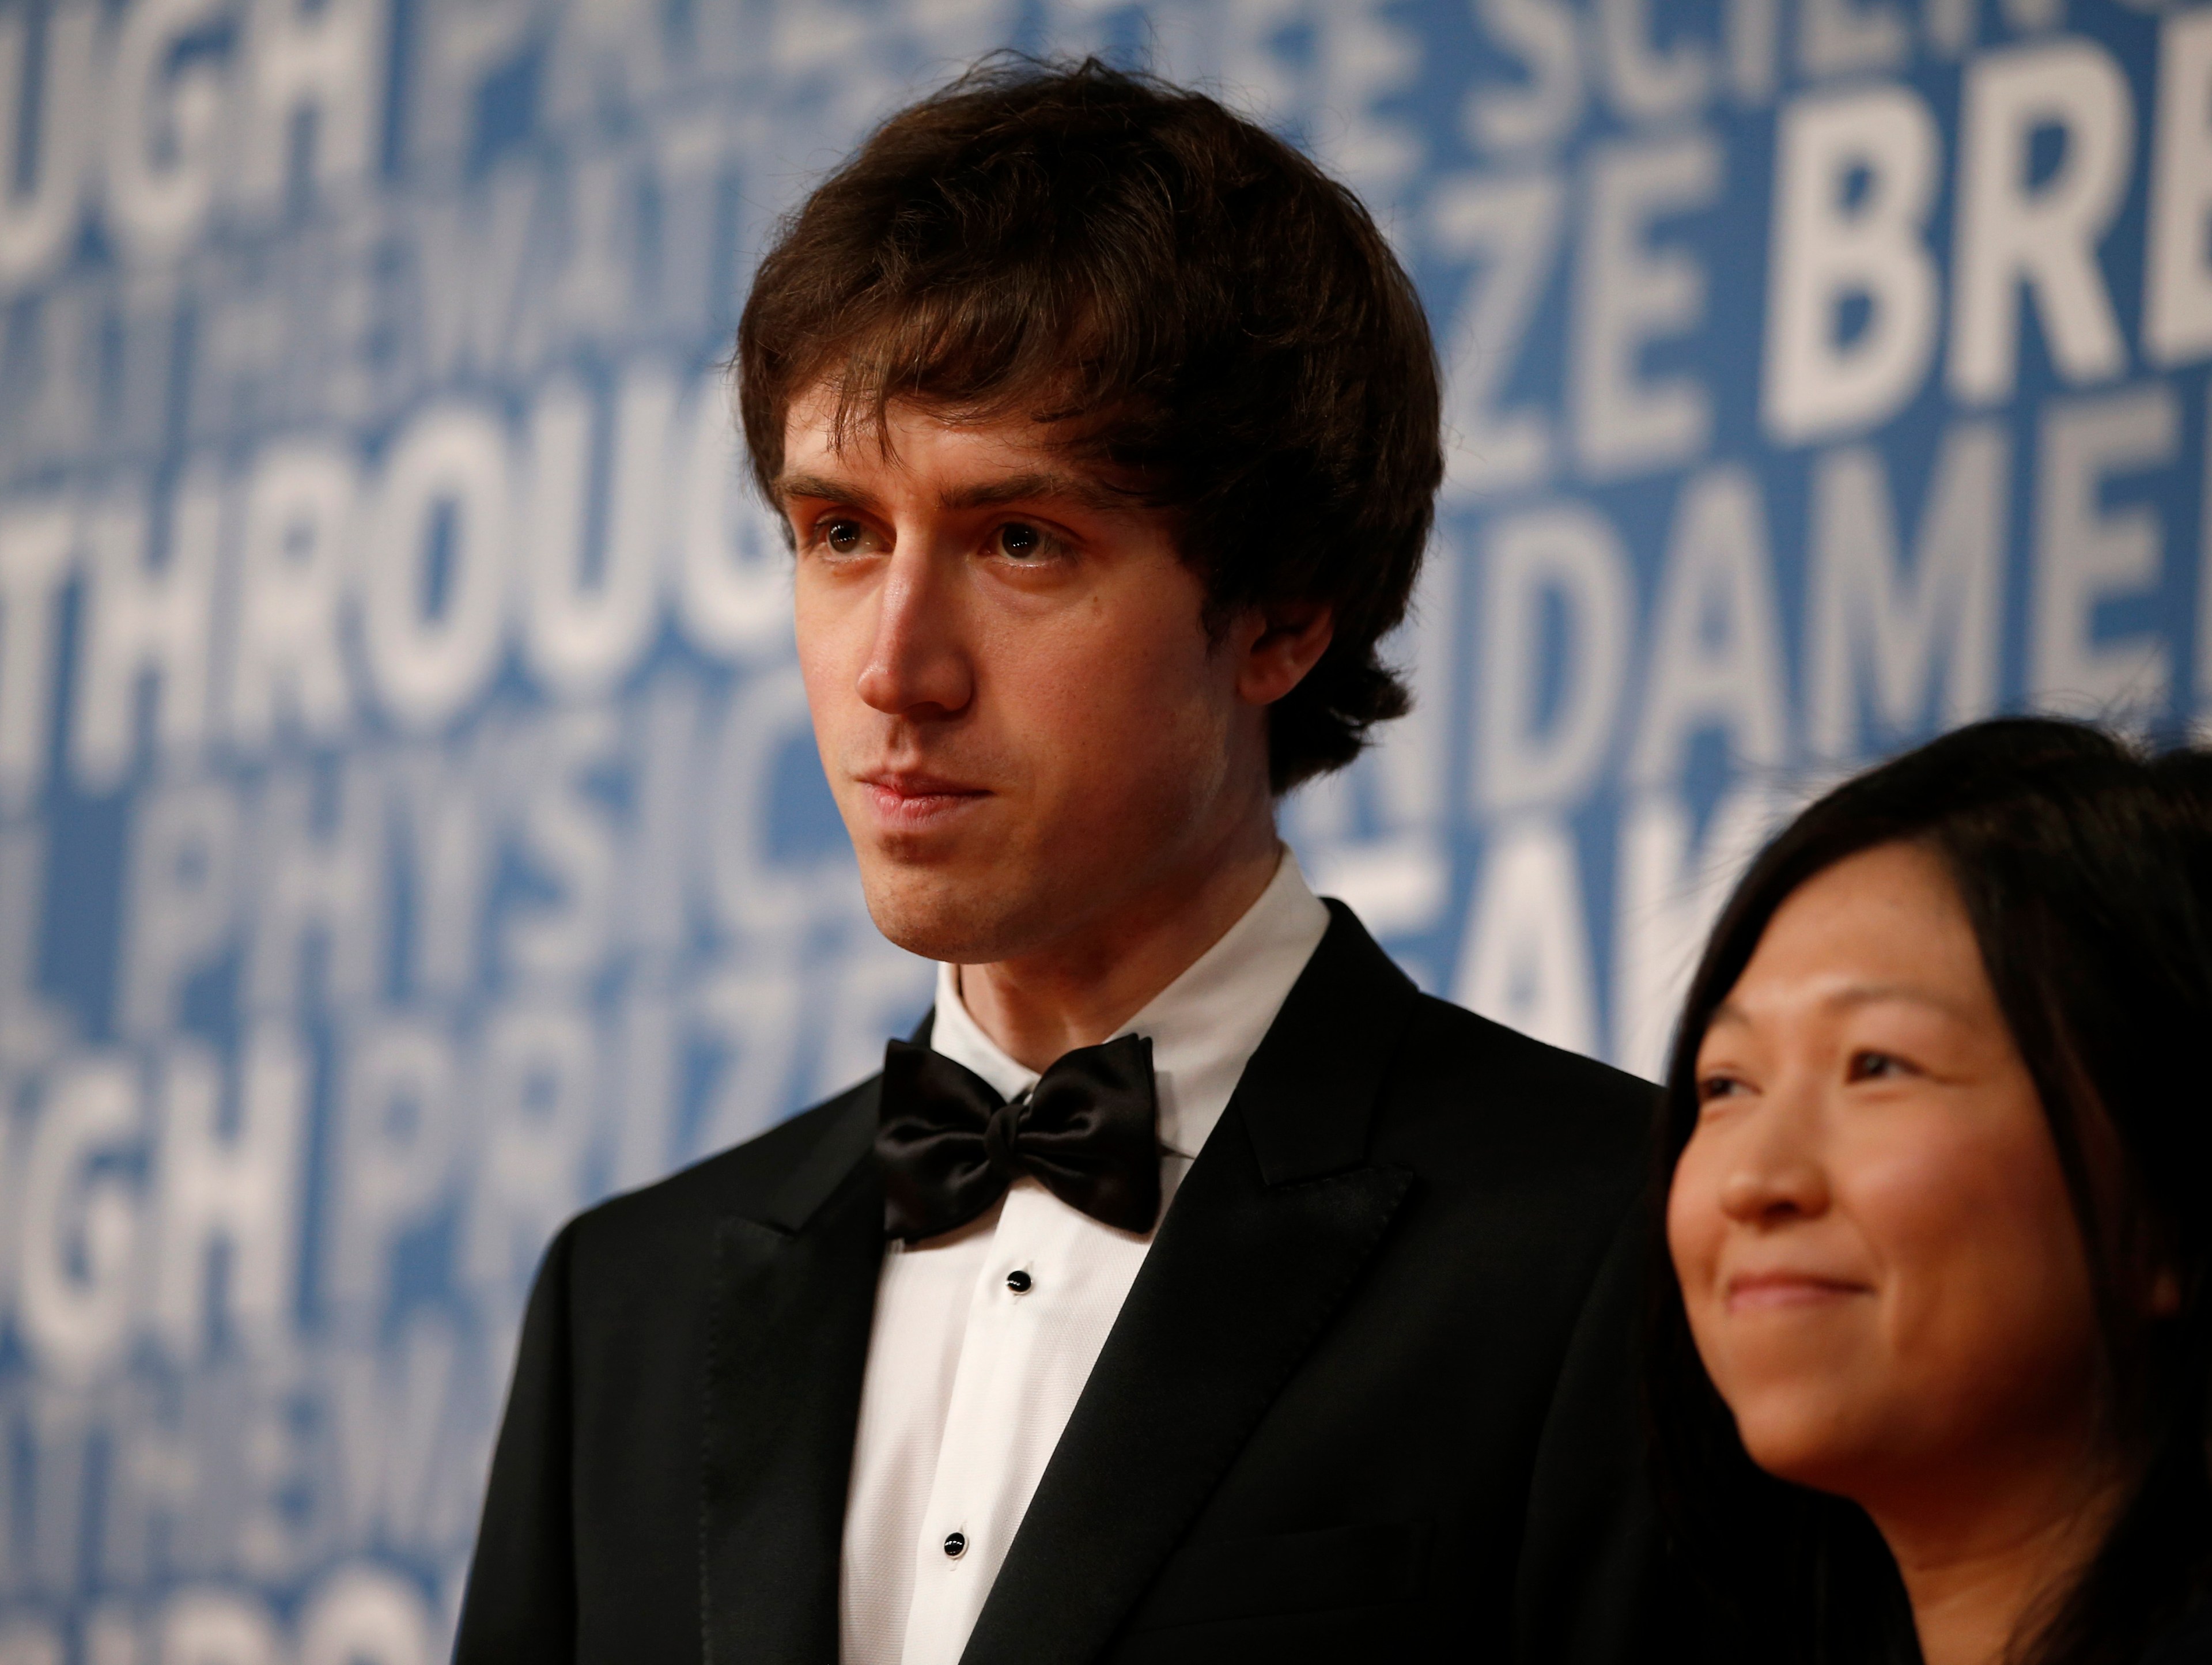 Quora CEO Adam D'Angelo can be seen wearing a black tuxedo, white shirt and a black bowtie. A woman is standing to his left smiling.